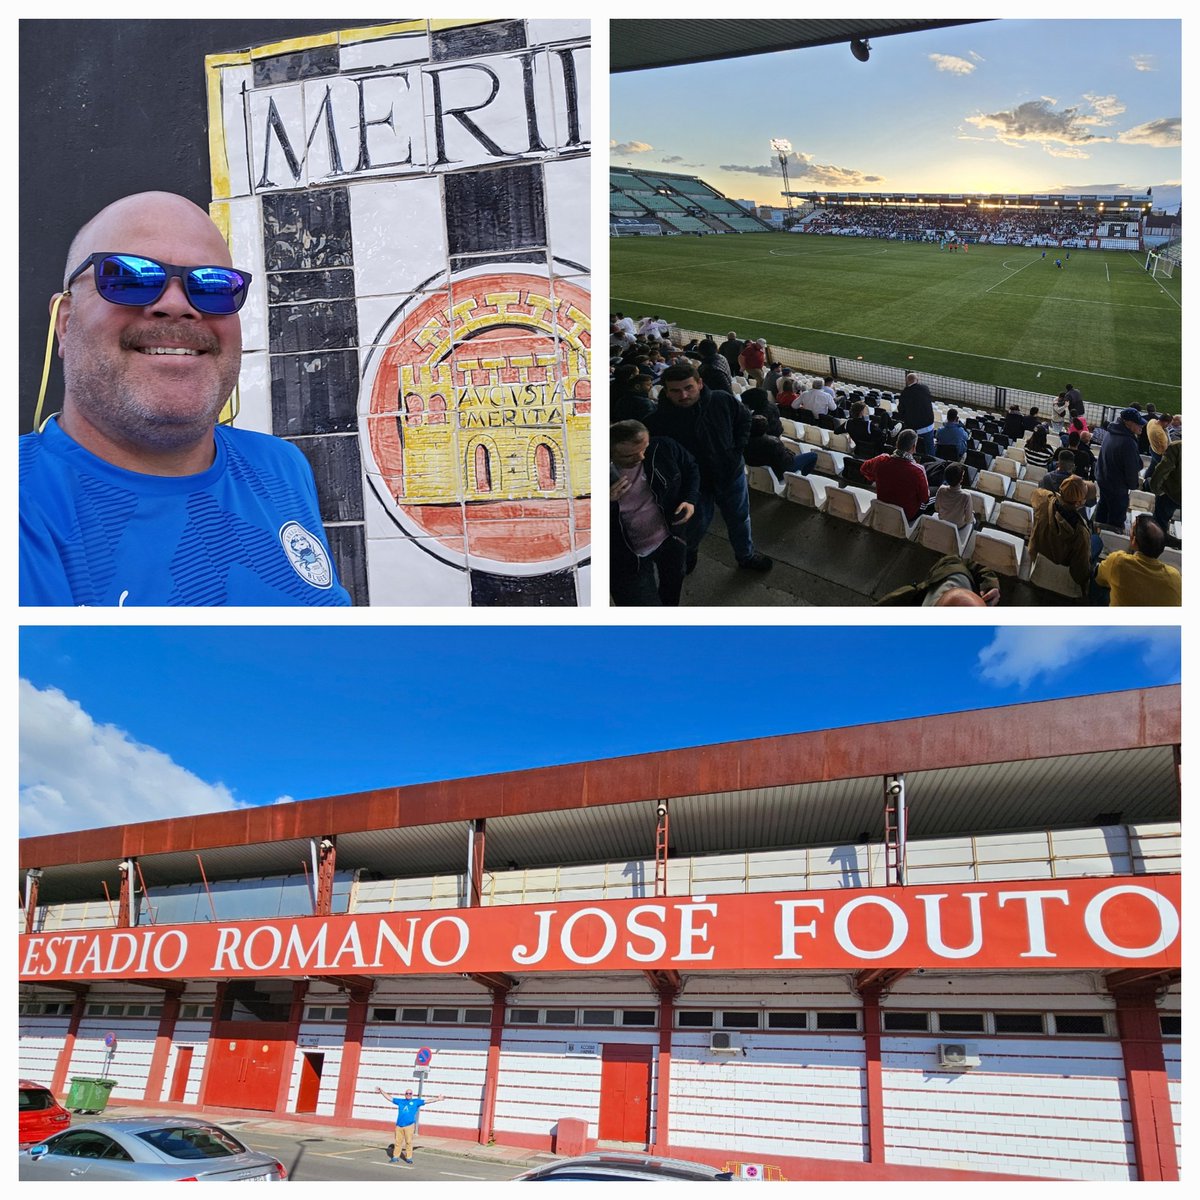 Dia 5: been feelin' Crabby all day. Flying @AnnapolisBlues colors in the streets, around town, and in the stands. Sites- Los Milagros Aqueduct y Prosperino Roman Dam y Estadio Romano José Fouto. Dia espléndida!